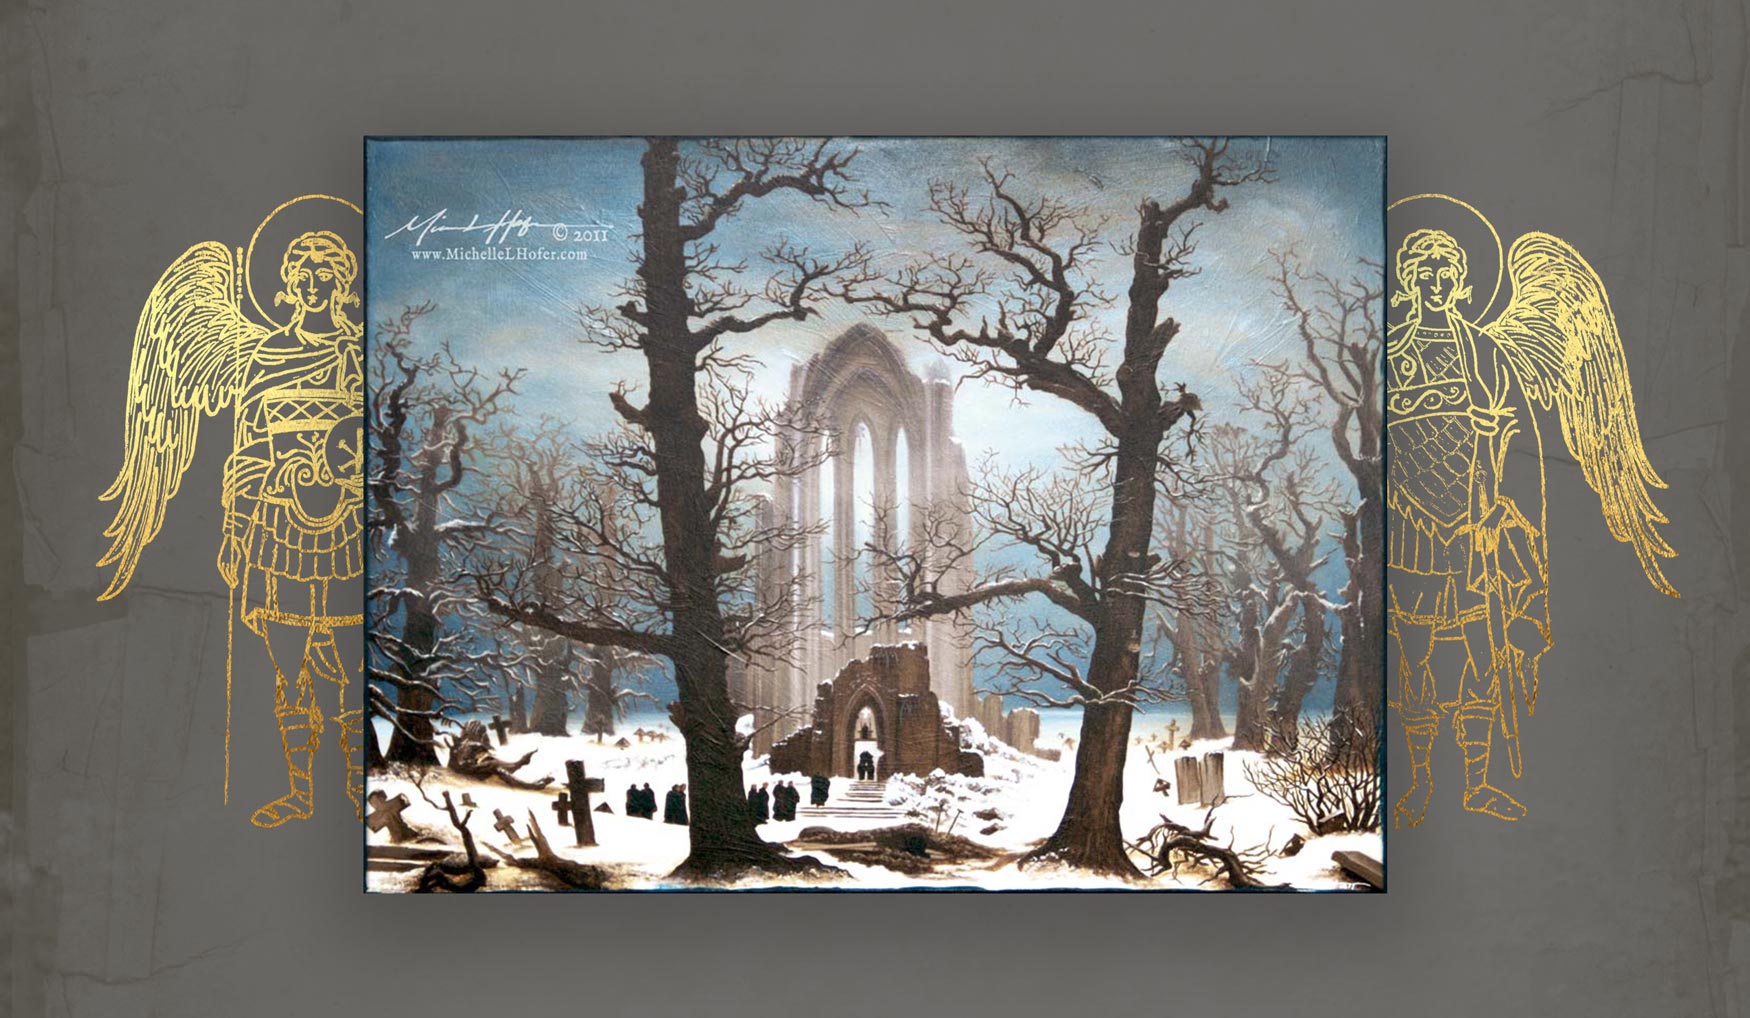 Acrylic painting with metallic accent based on Monastery Graveyard in Snow by Caspar David Friedrich painted in 1817-19. The original painting was destroyed in WWI.